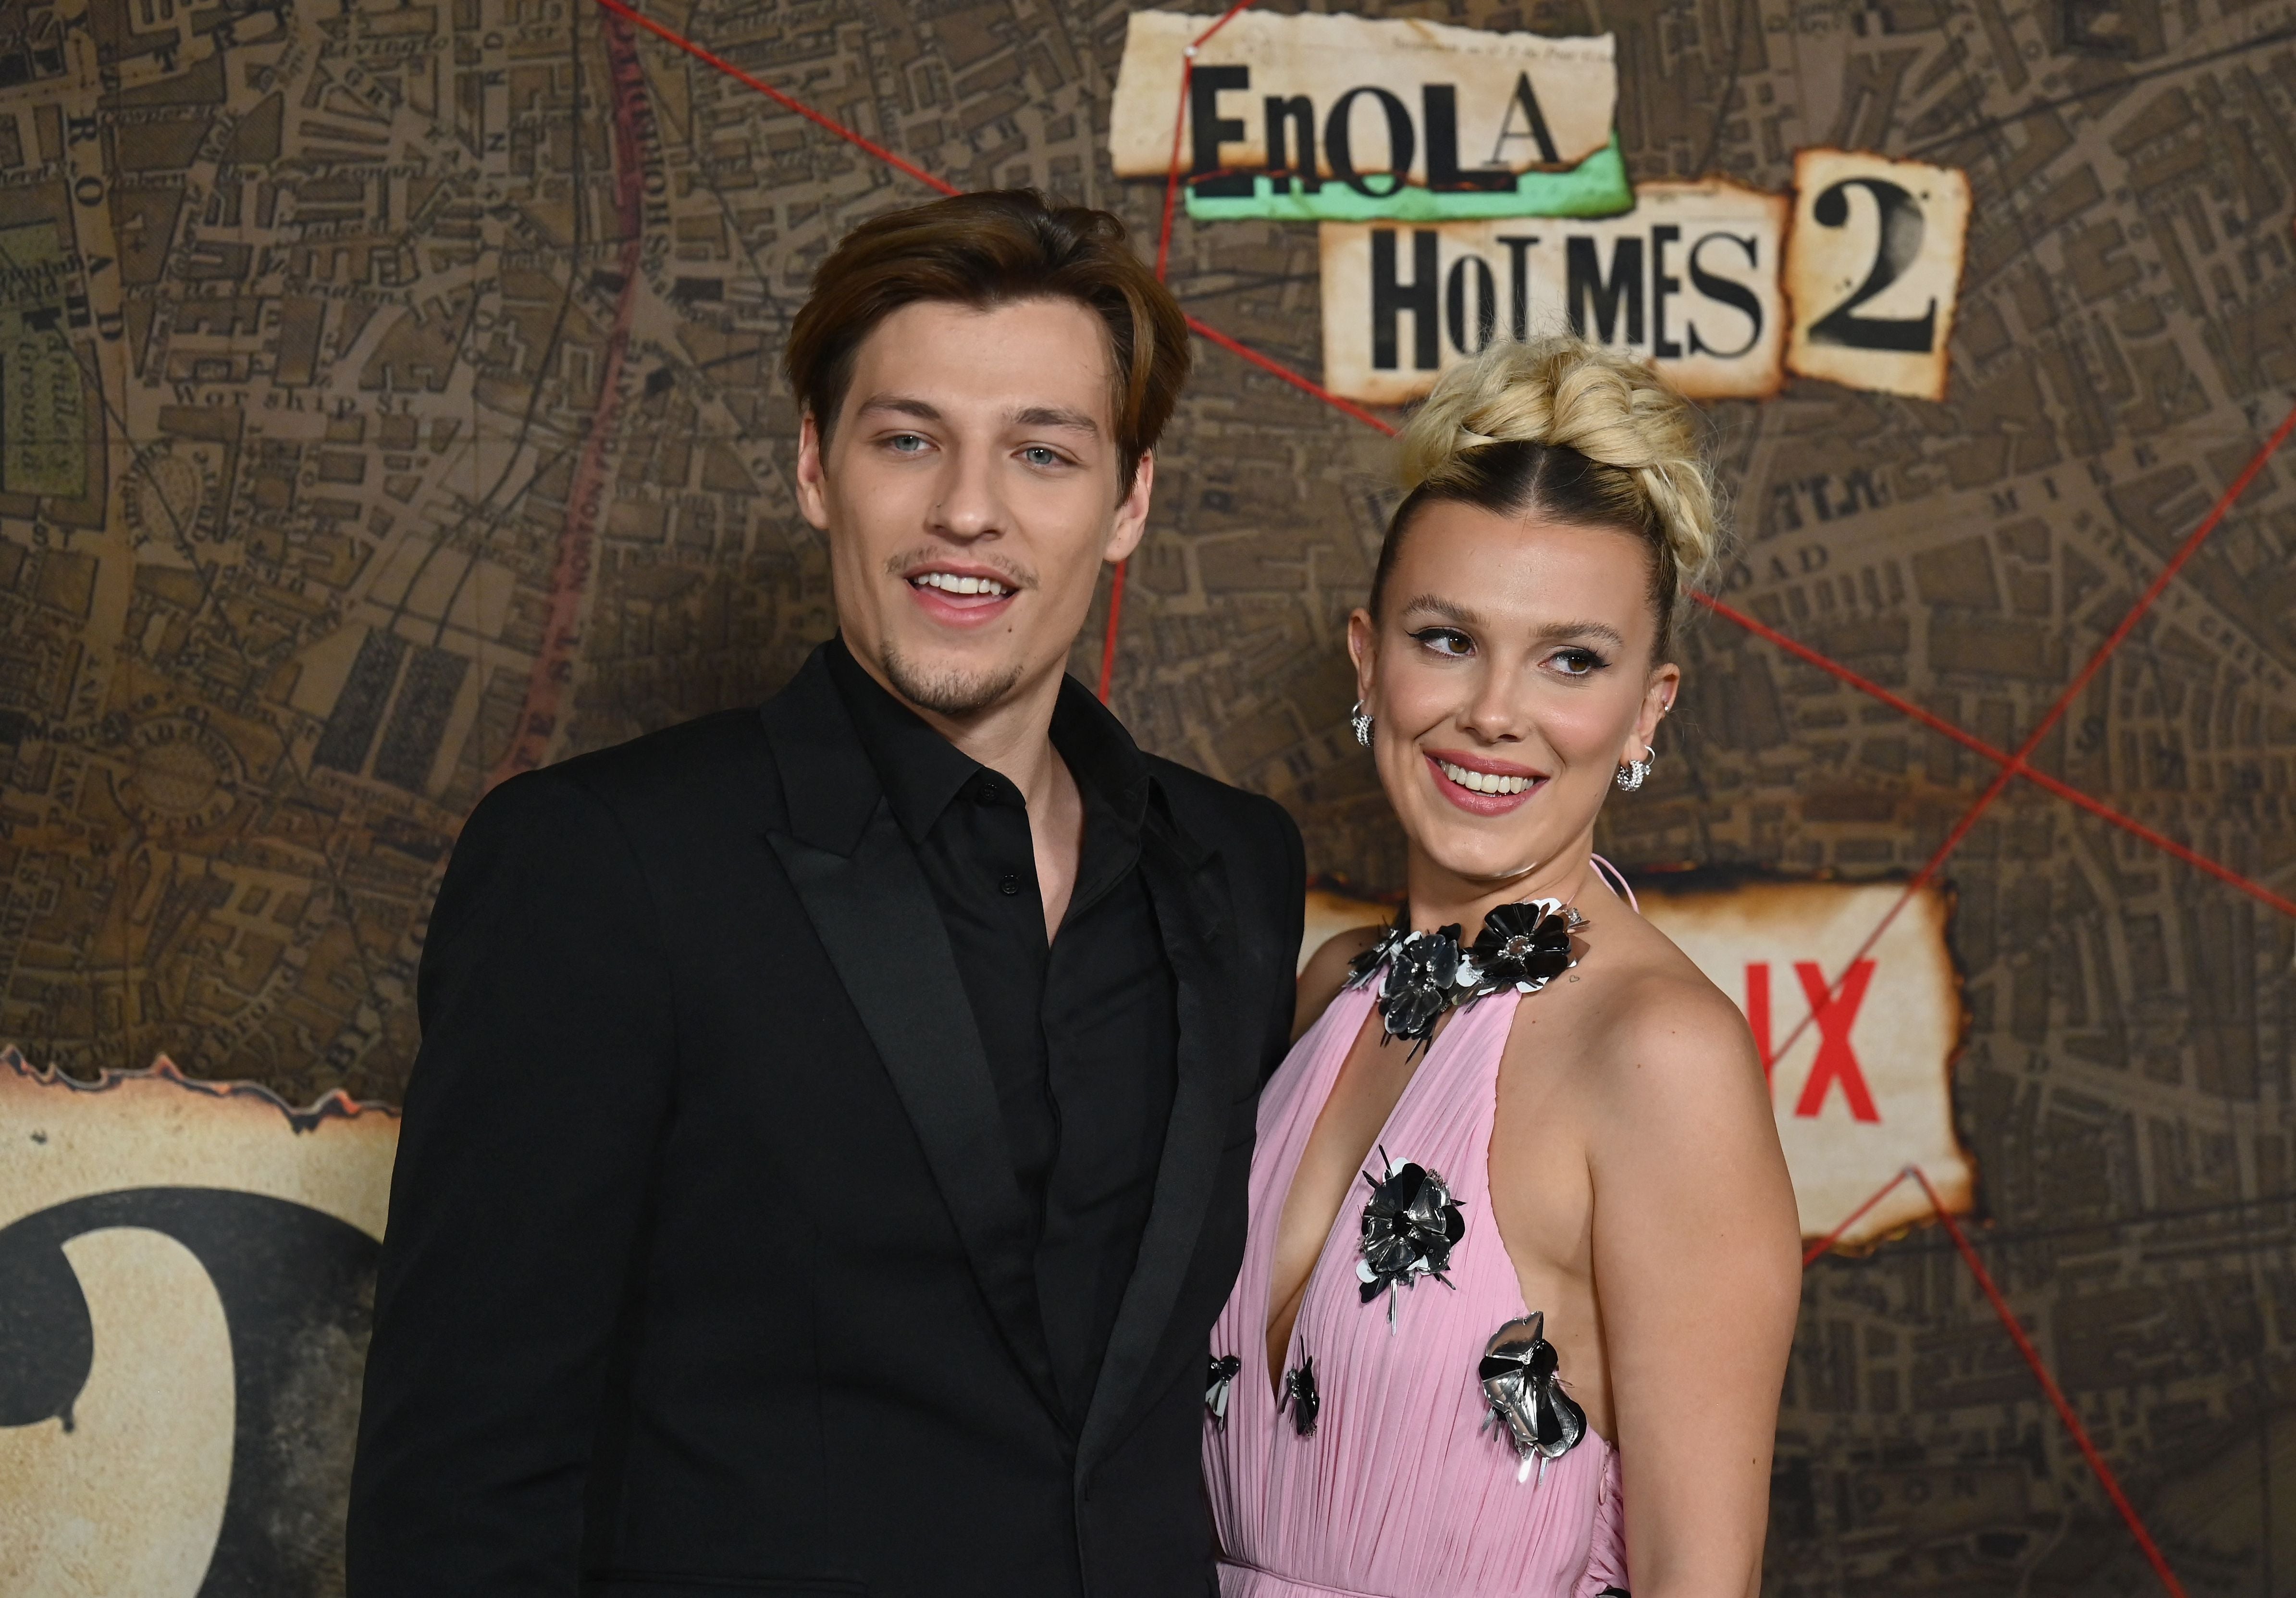 Who Is Millie Bobby Brown Engaged To?